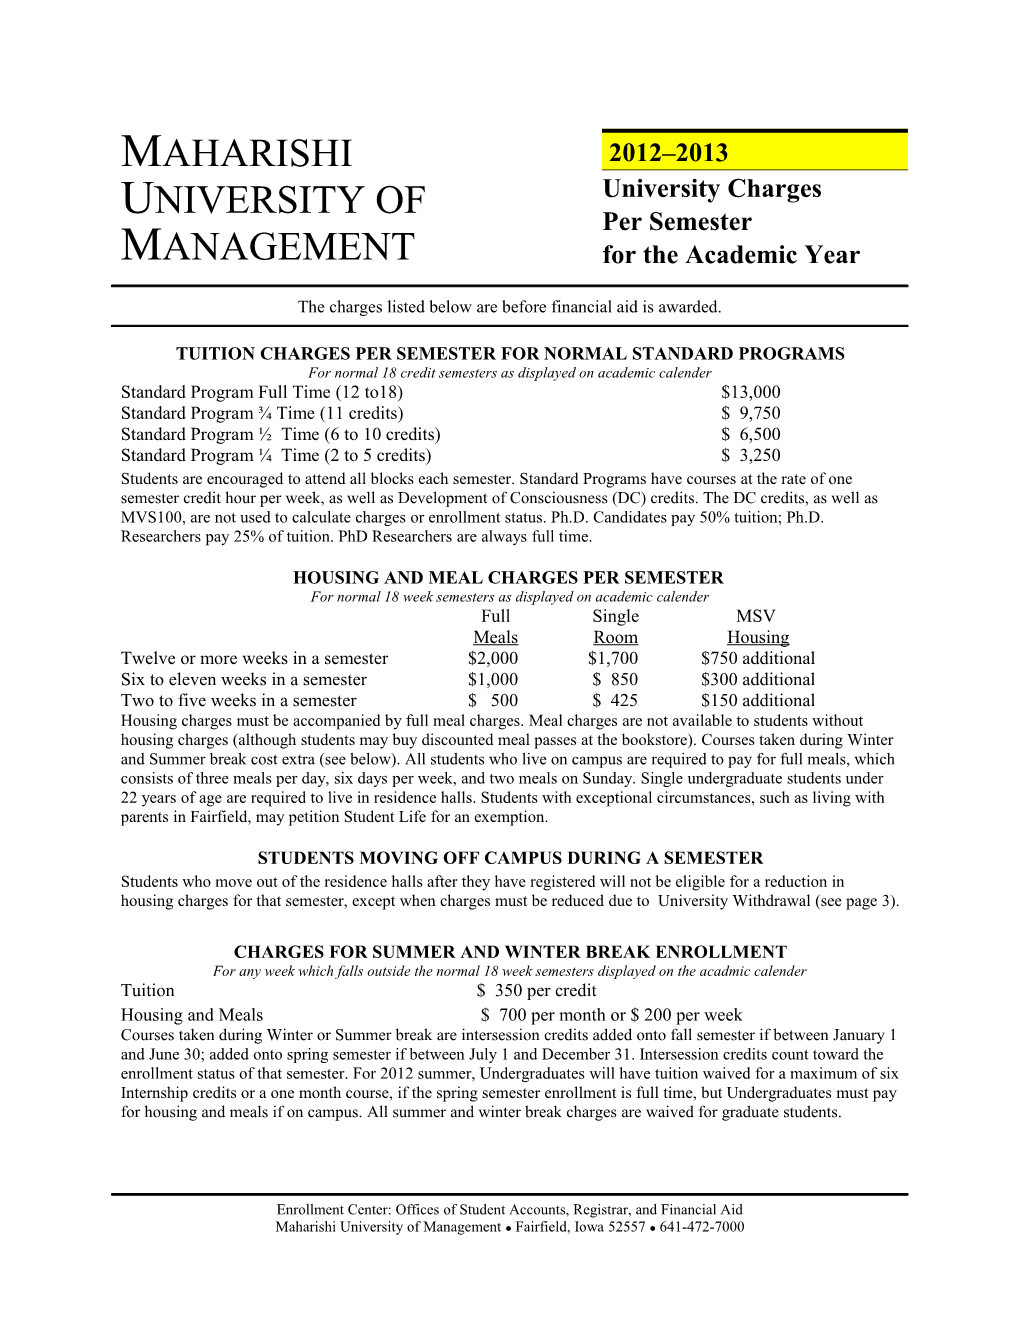 1998-1999 University Charges Per Semester for the Academic Year